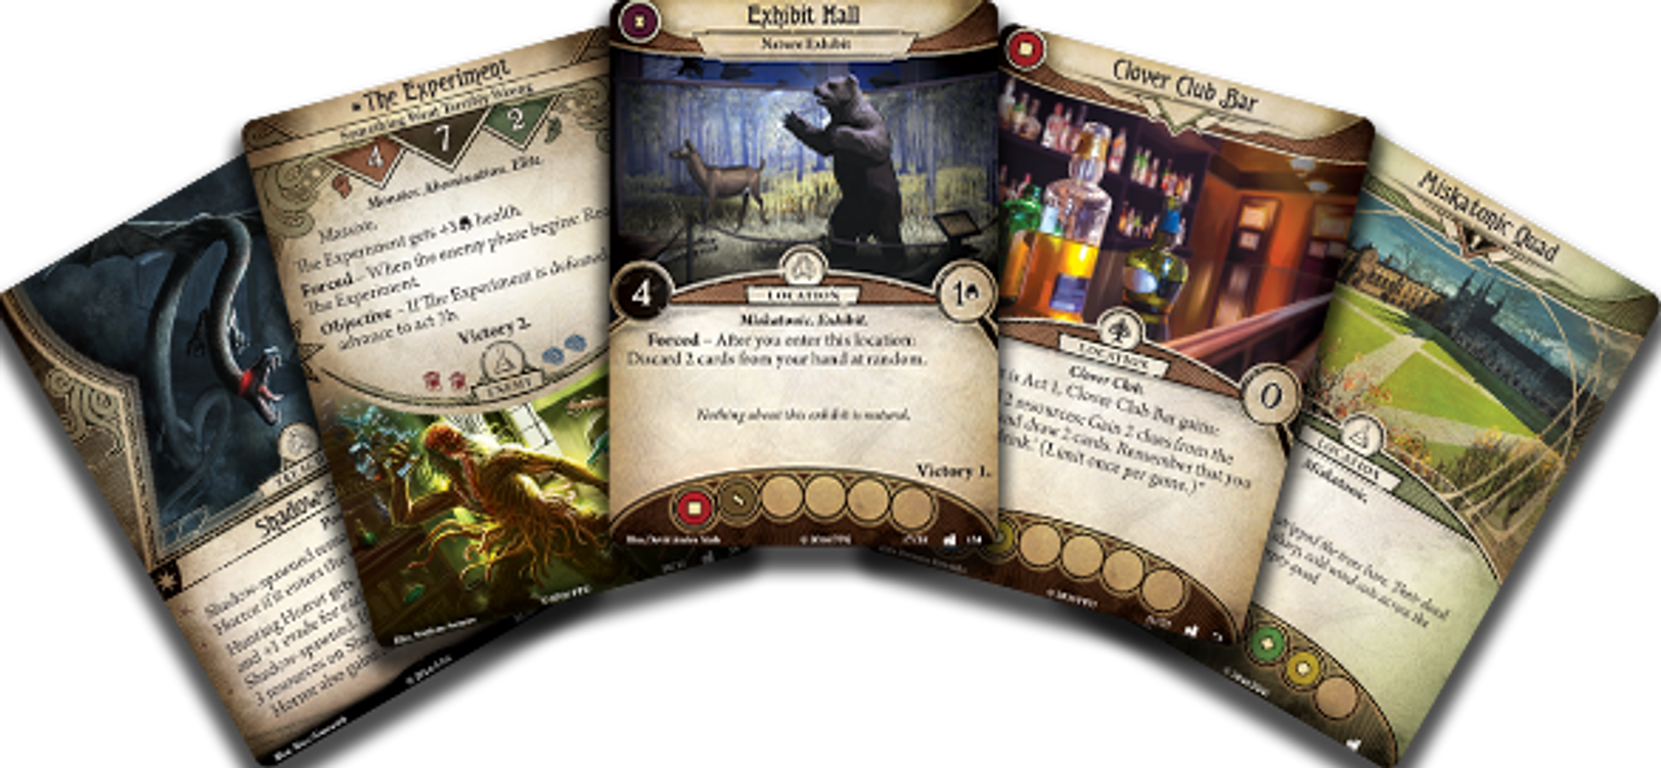 Arkham Horror: The Card Game – The Dunwich Legacy: Campaign Expansion cartes